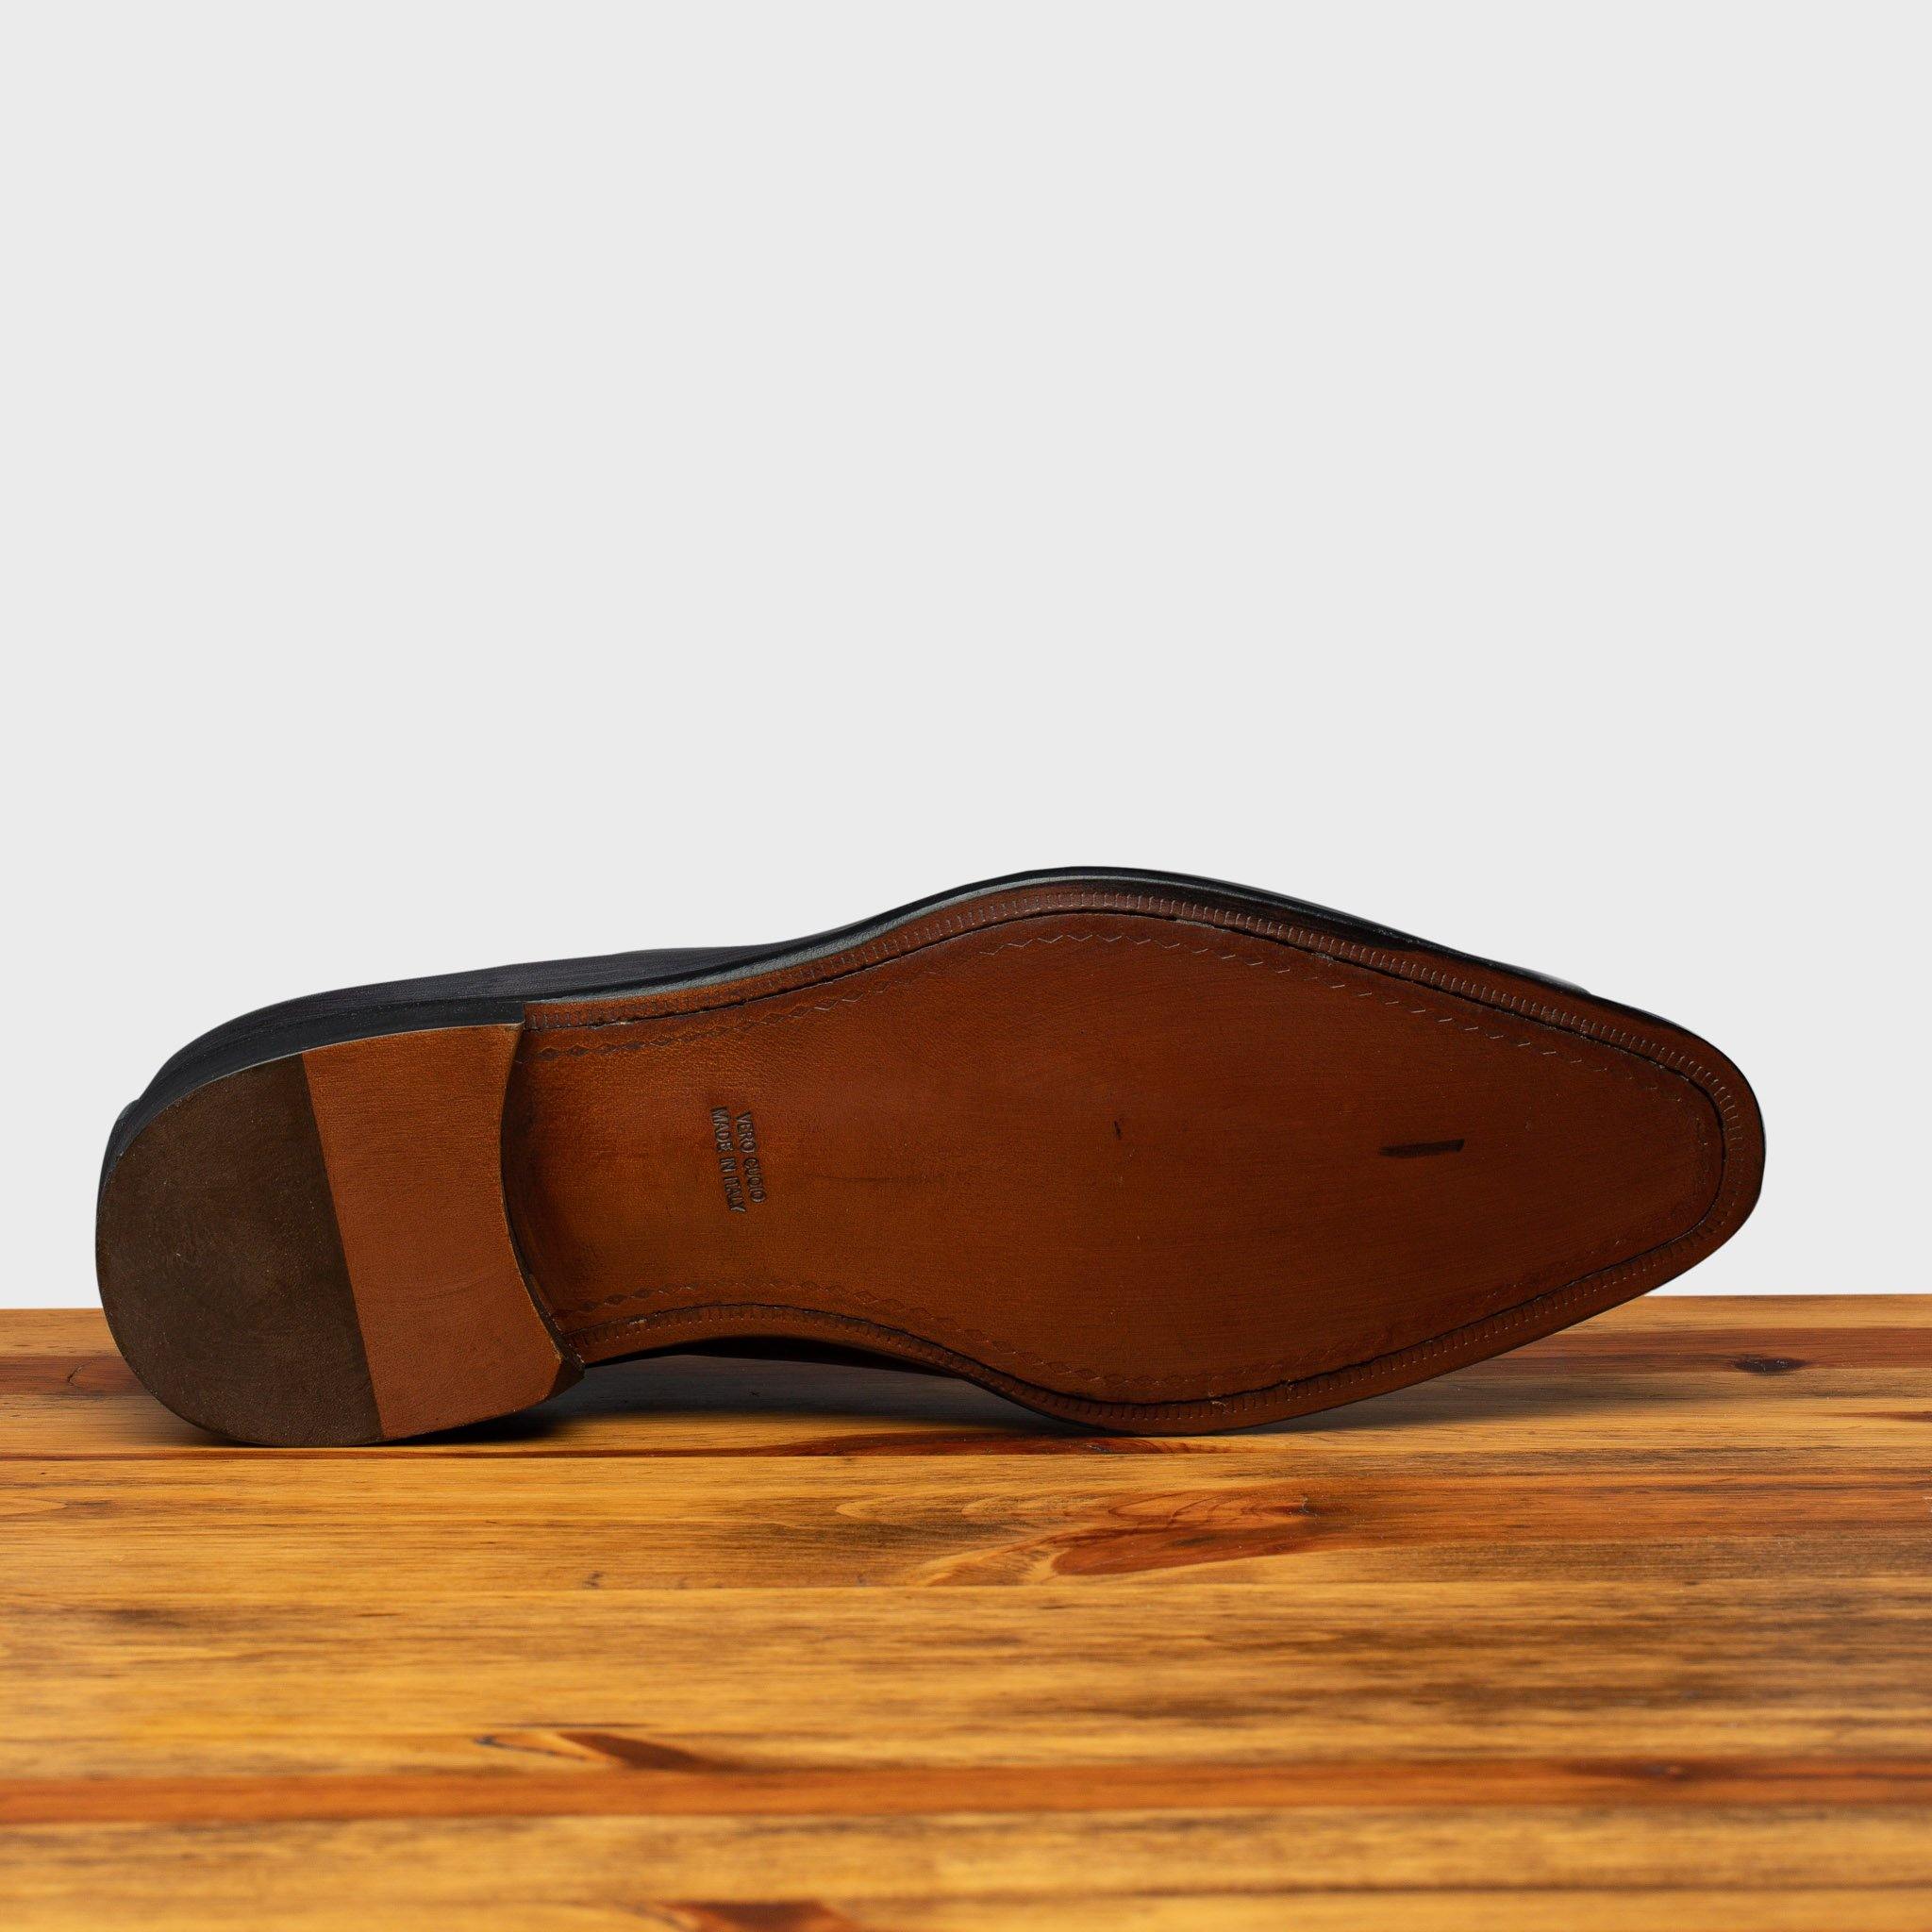 Full leather outsole of 4633 Calzoleria Toscana Grey Cayenne Calf Wholecut Balmoral on top of a wooden table